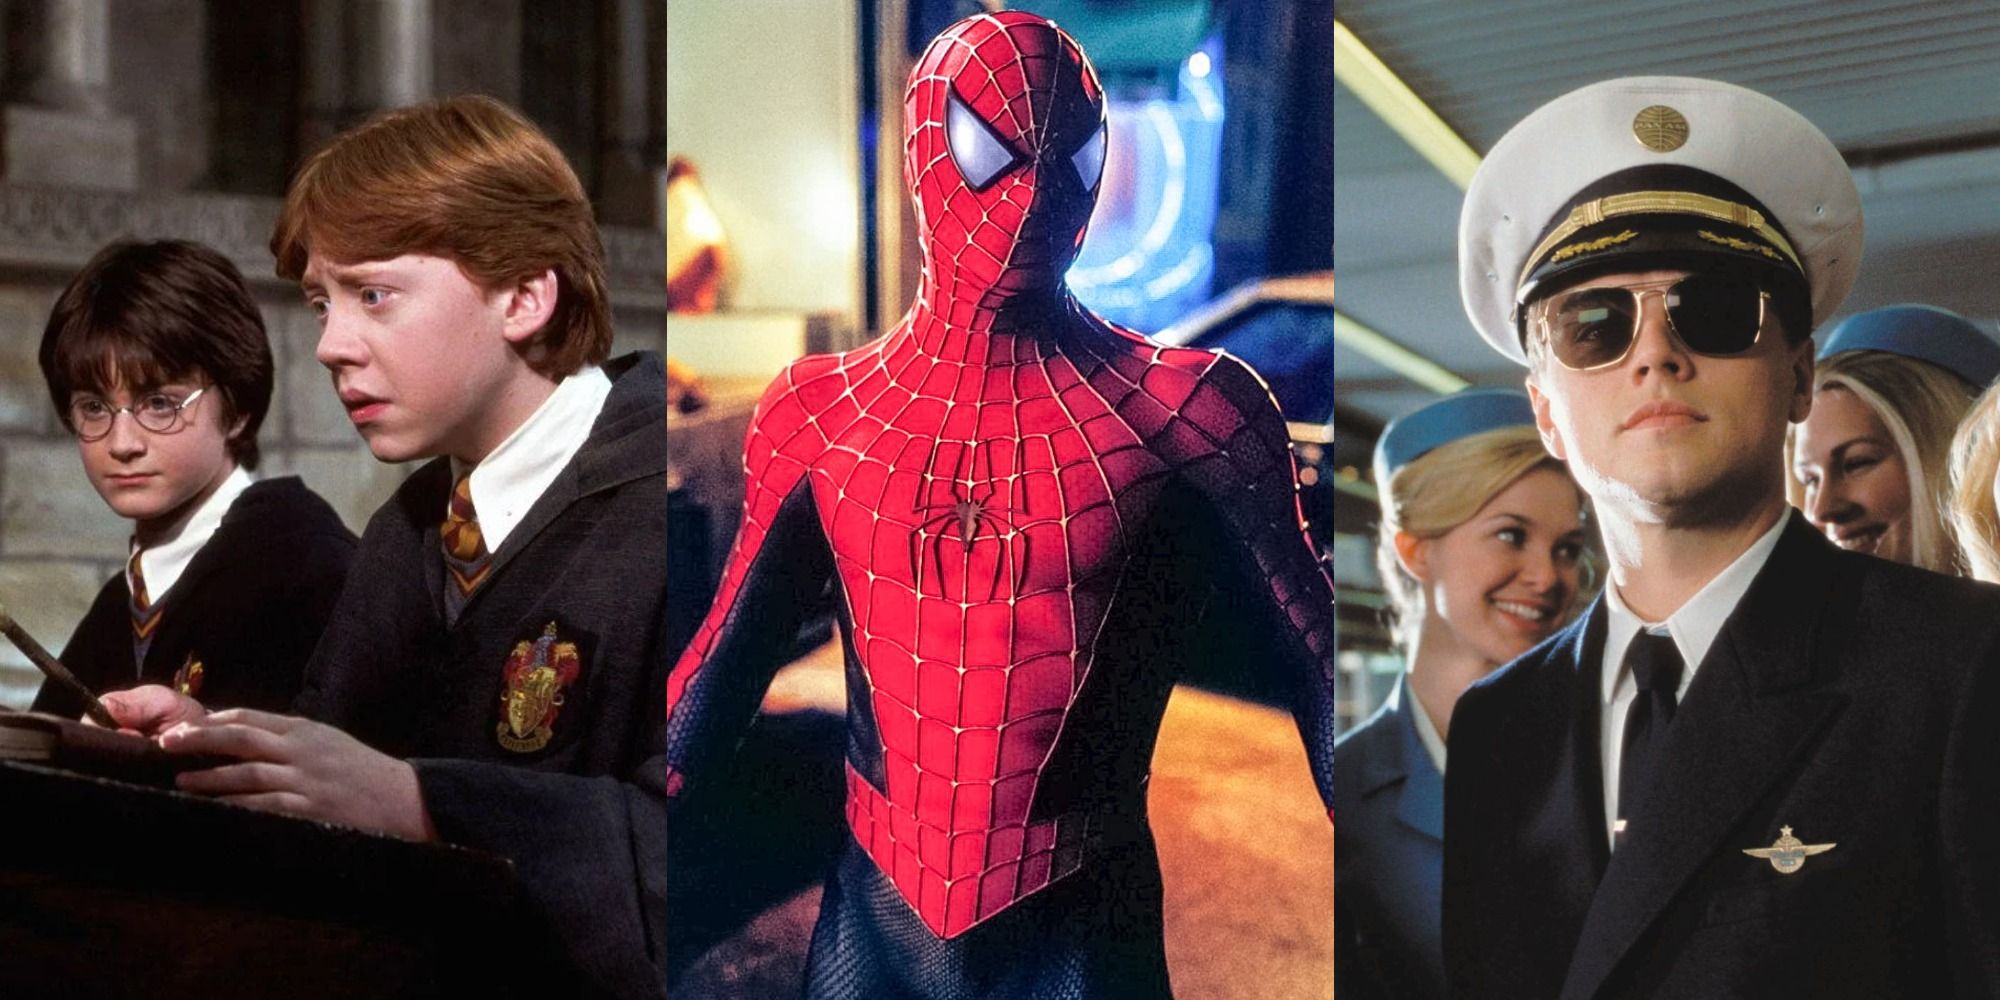 Stills from Chamber of Secrets, Spider-Man, and Catch Me If You Can